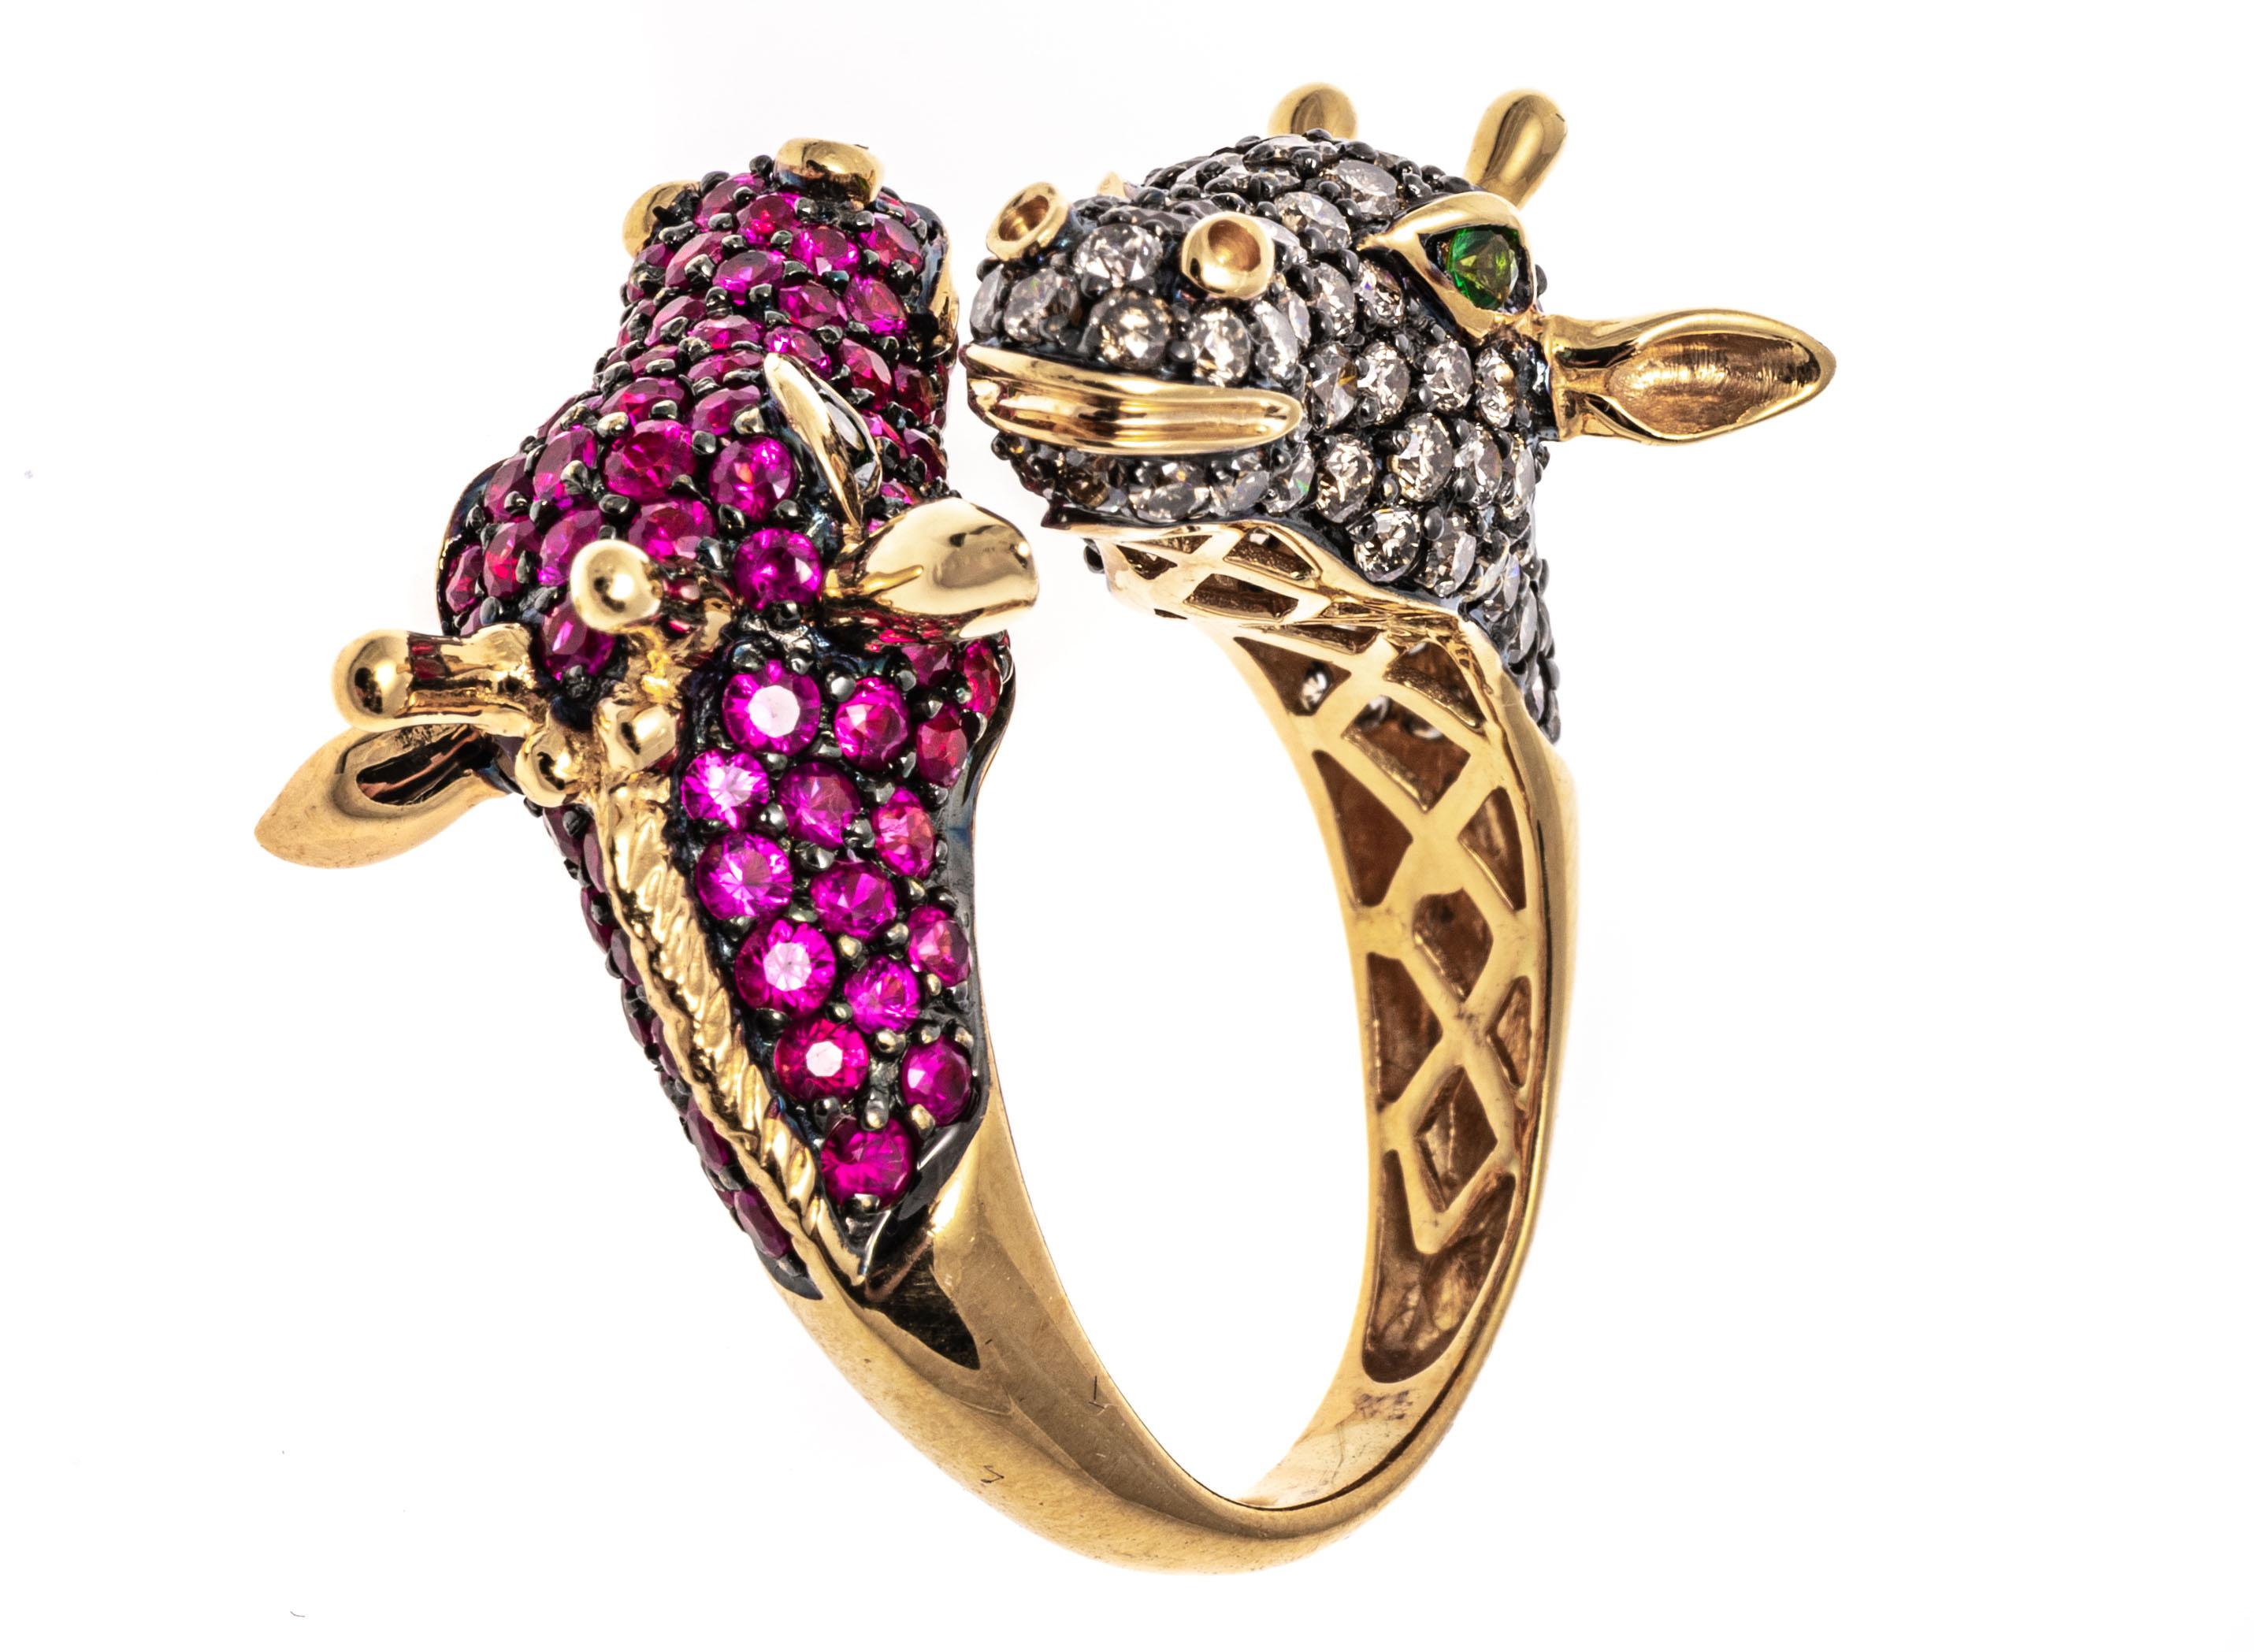 Contemporary 18k Gold Pave Set Cognac Diamond and Pink Sapphire Bypass Giraffes Ring For Sale